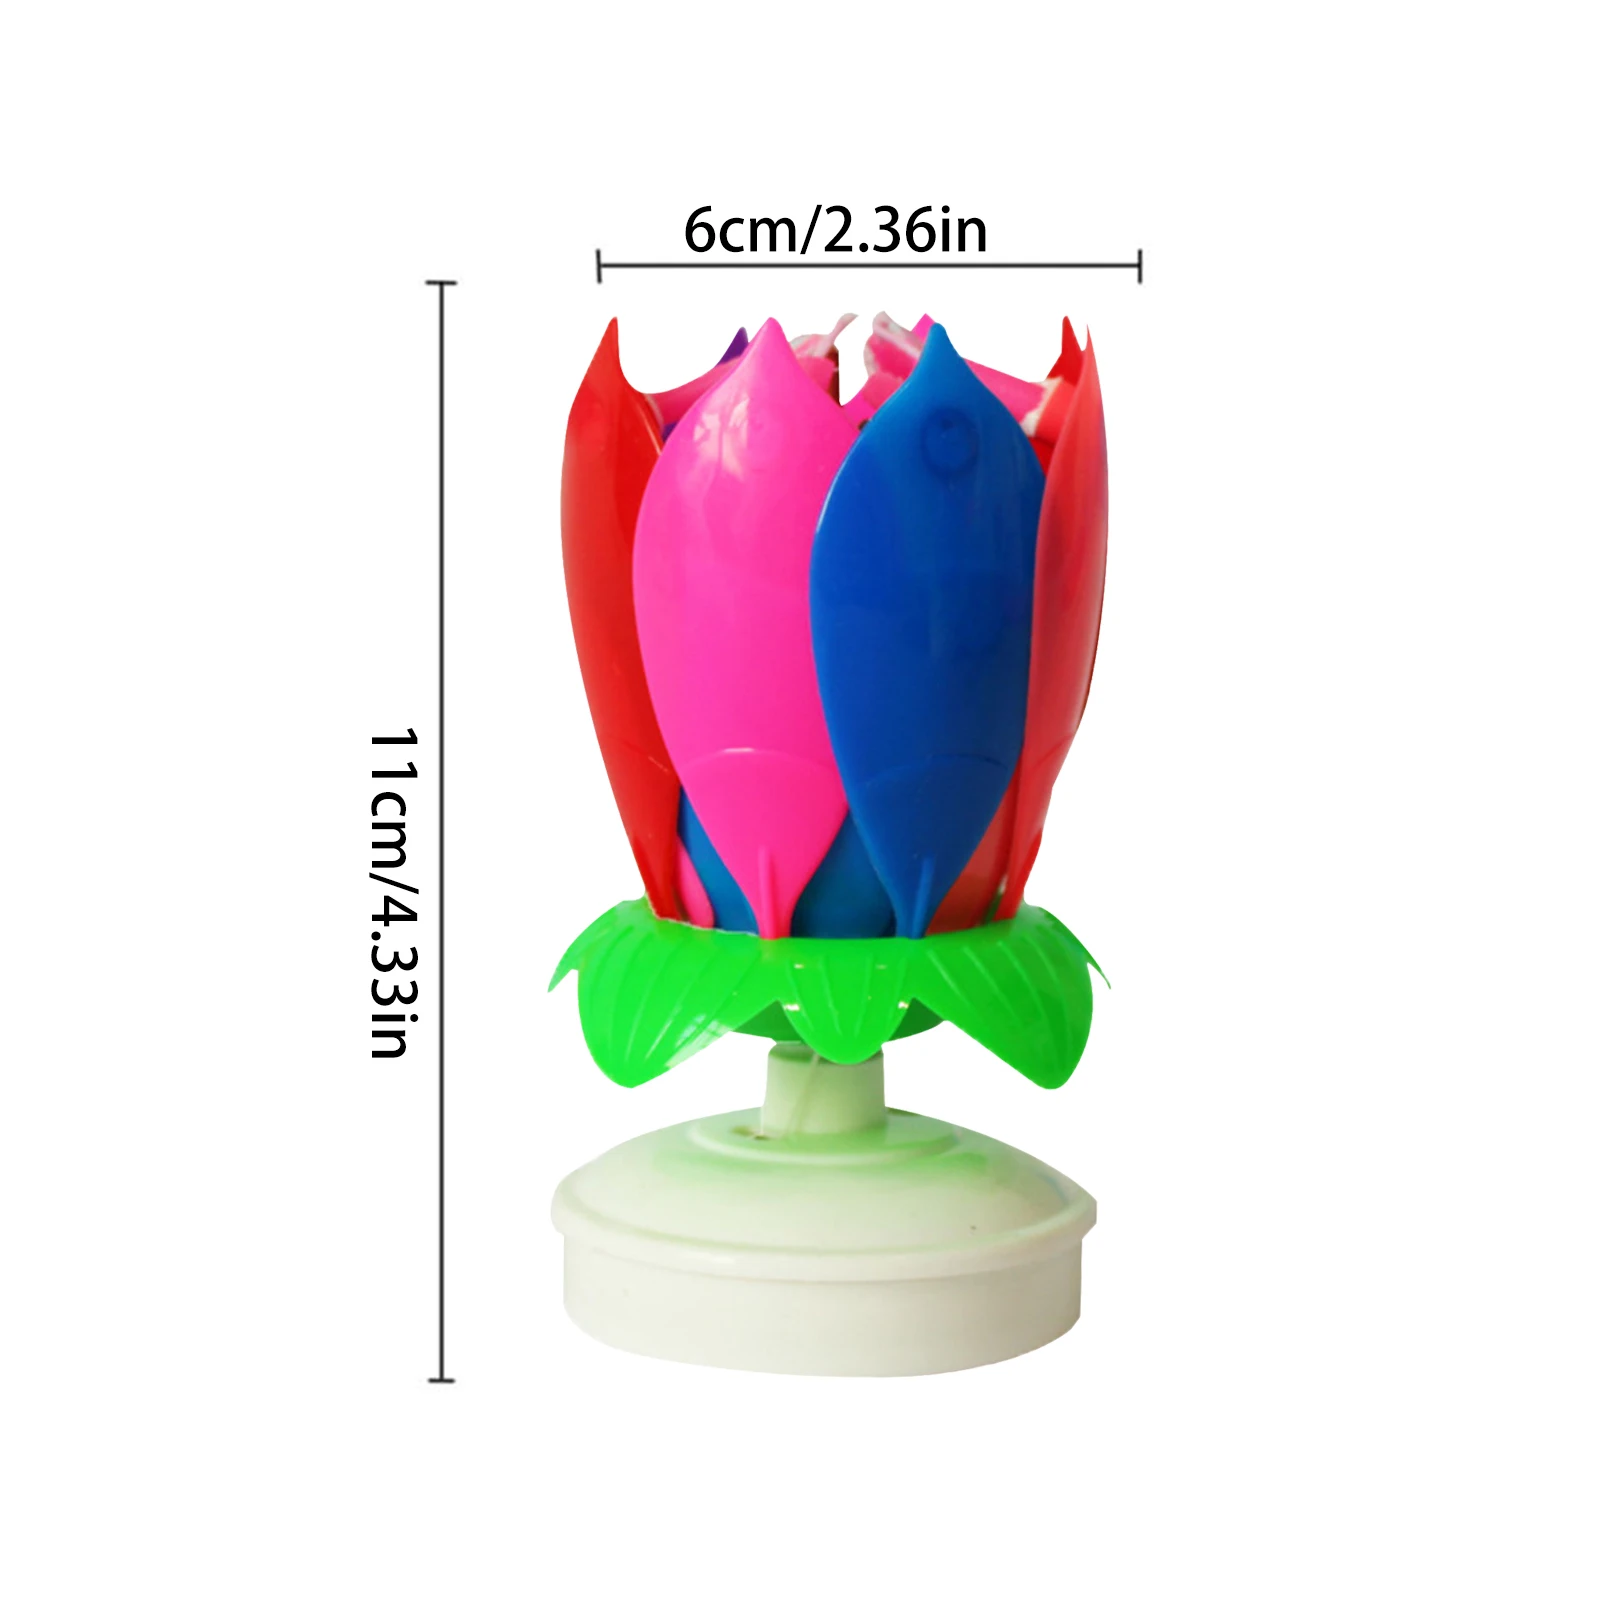 Musical Flower Candle